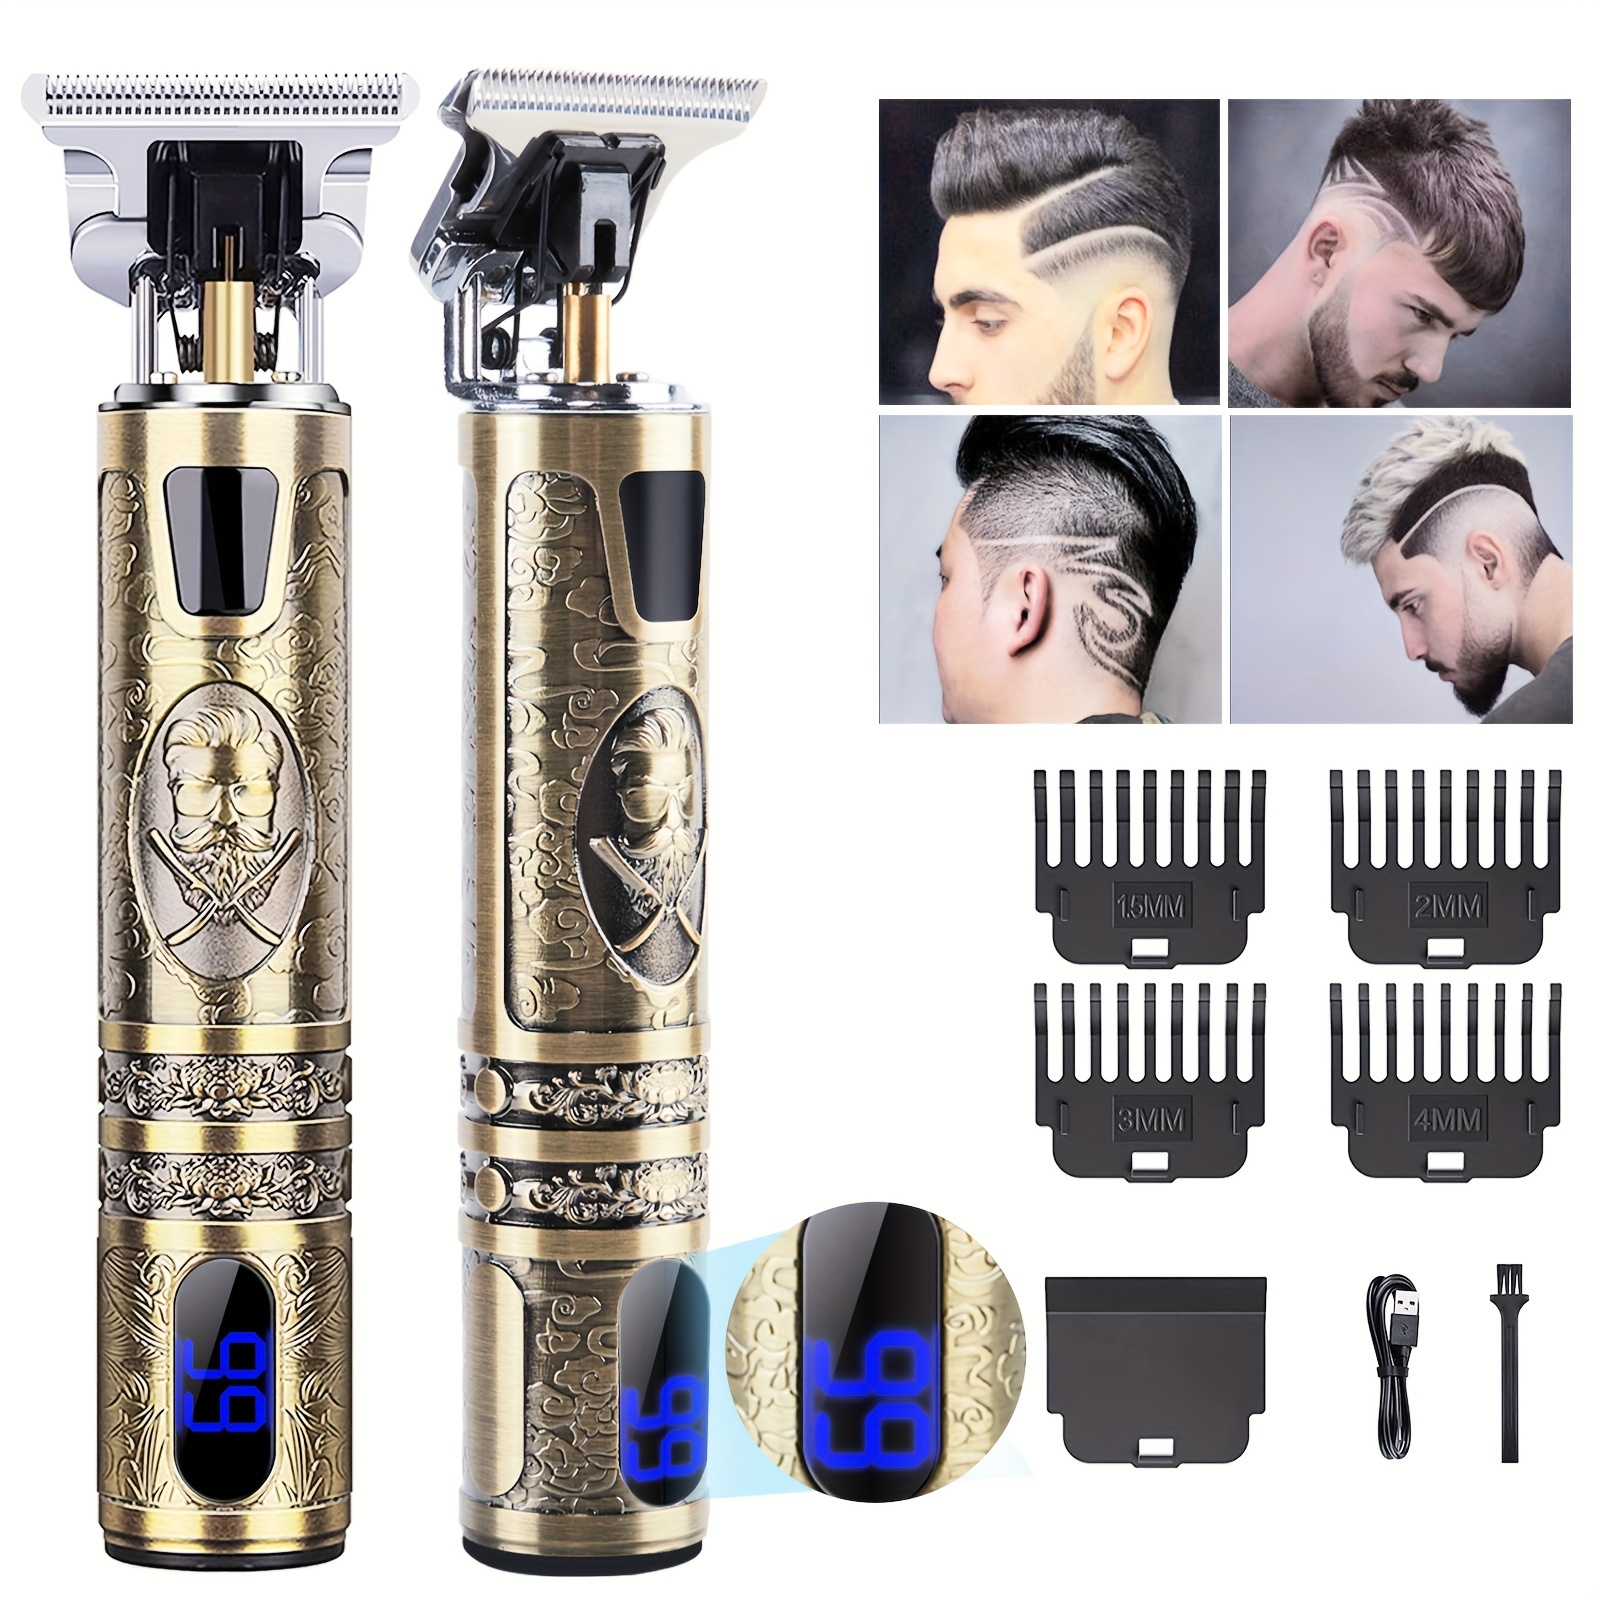 

Professional Men's Hair Clipper, Beard Shaver With Led Display, Hair Clipper, Beard Trimmer, Usb-c Charging, Cordless Hair Trimmer Set With 4 Attachment Limit Combs Father's Day Gift